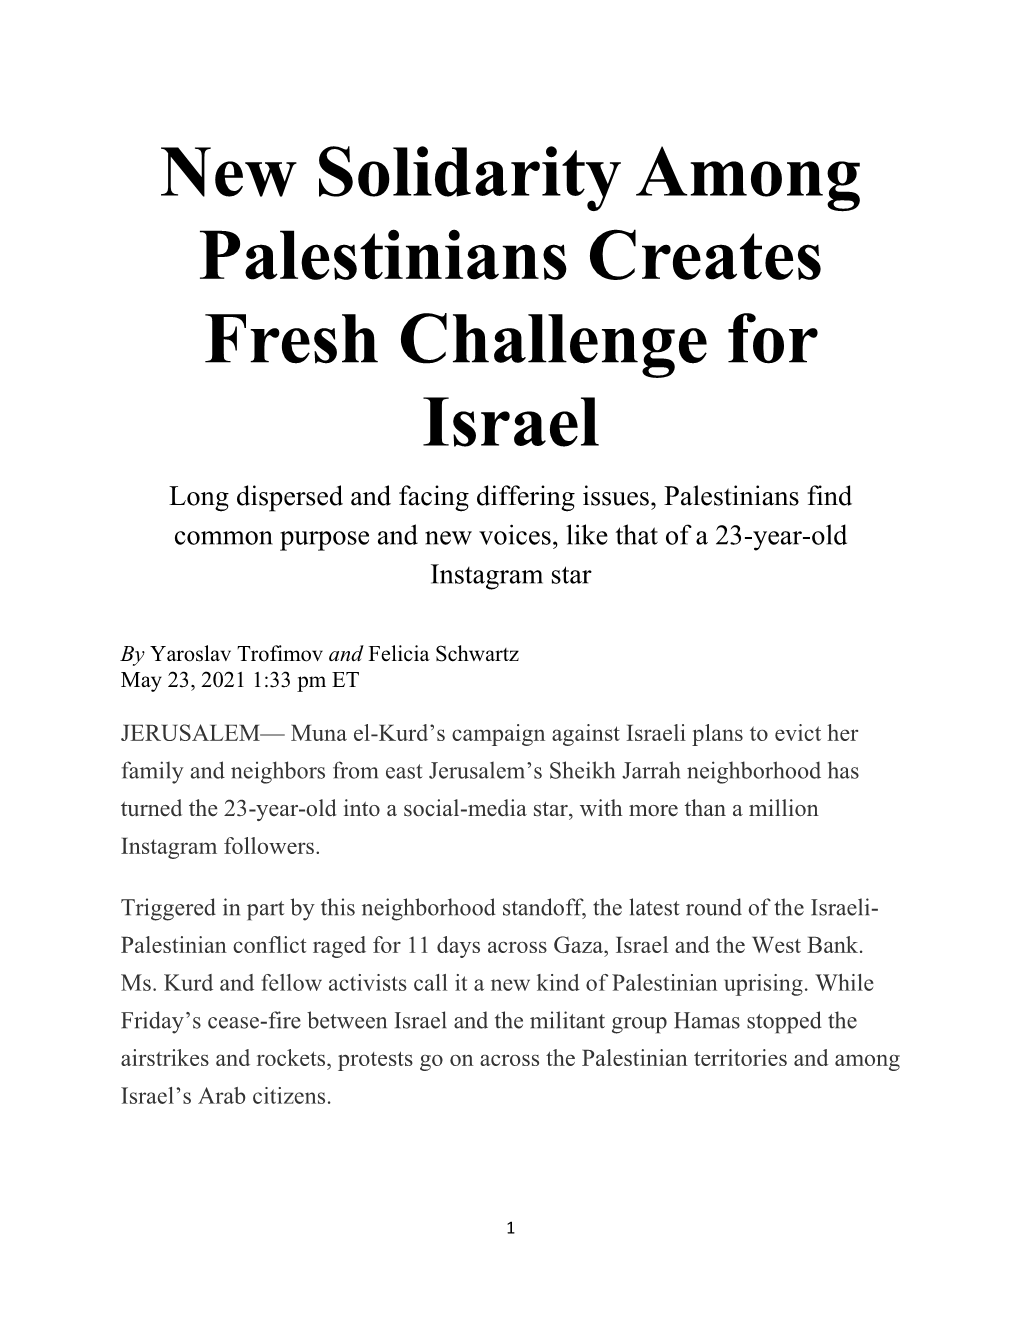 New Solidarity Among Palestinians Creates Fresh Challenge for Israel